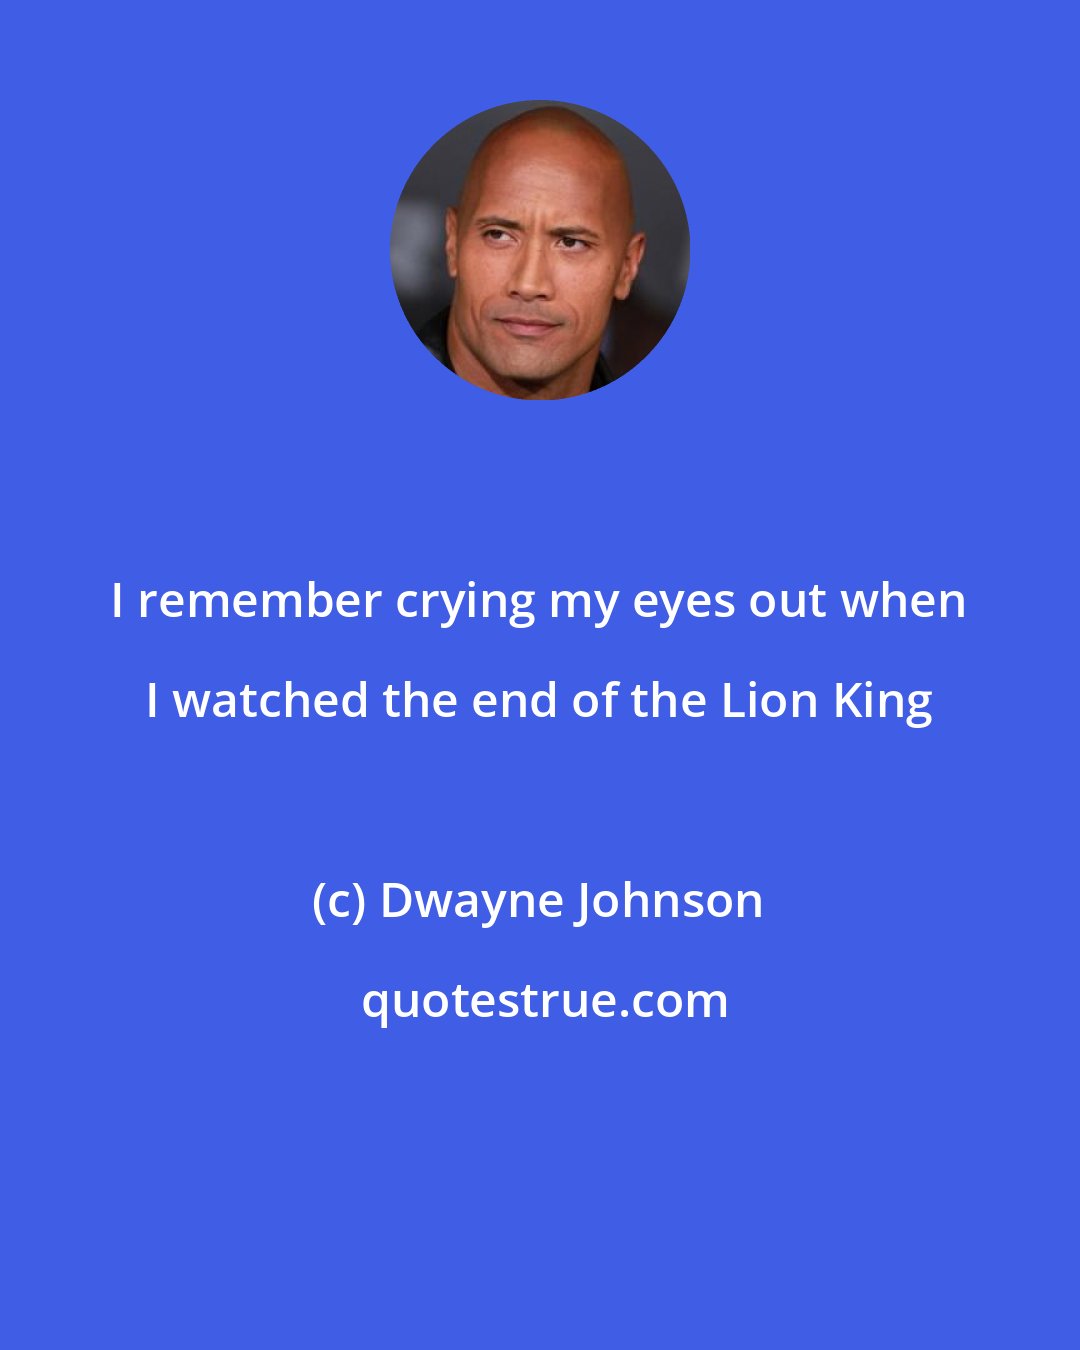 Dwayne Johnson: I remember crying my eyes out when I watched the end of the Lion King